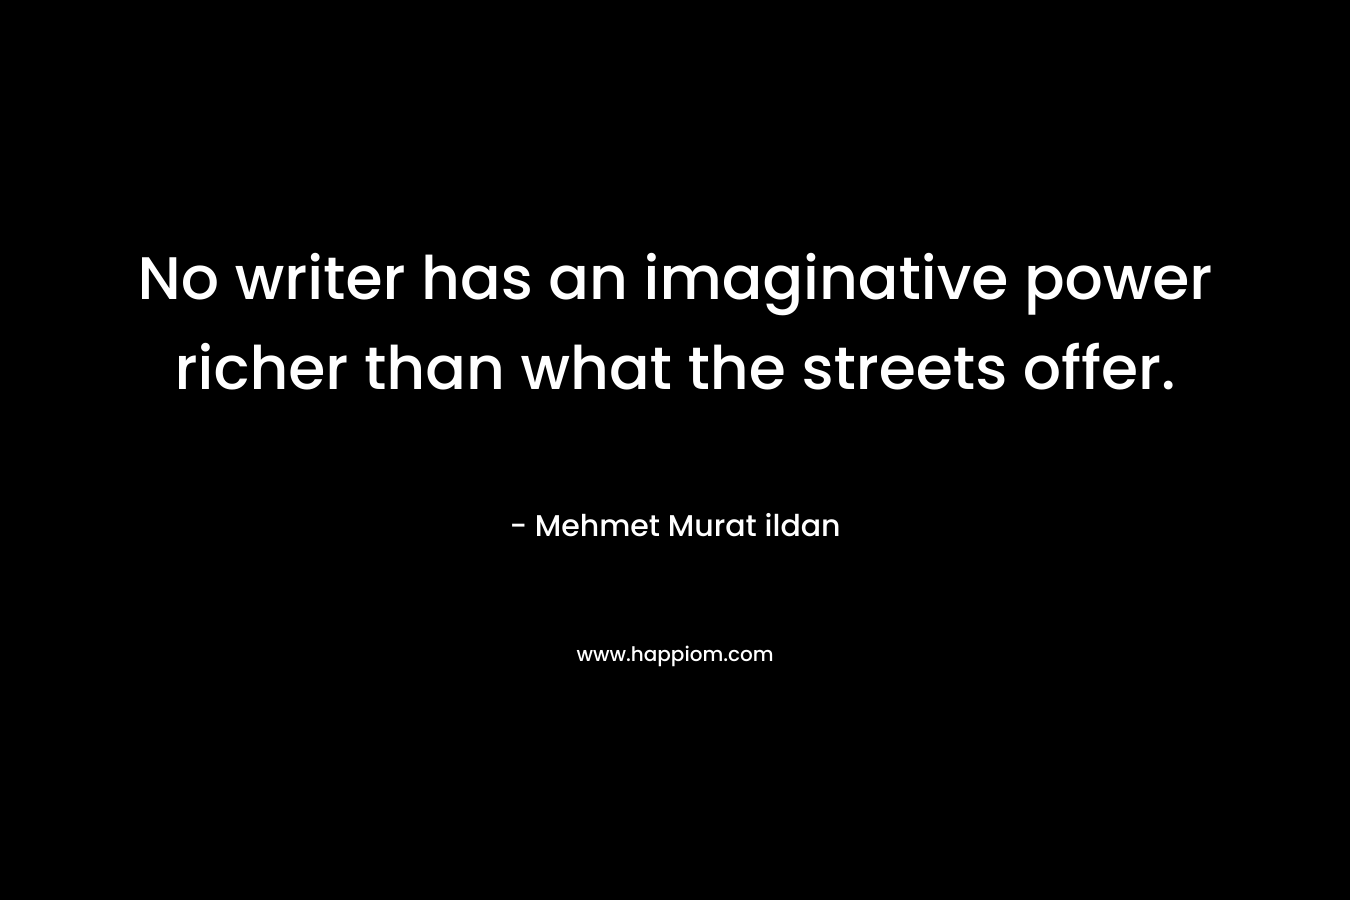 No writer has an imaginative power richer than what the streets offer.